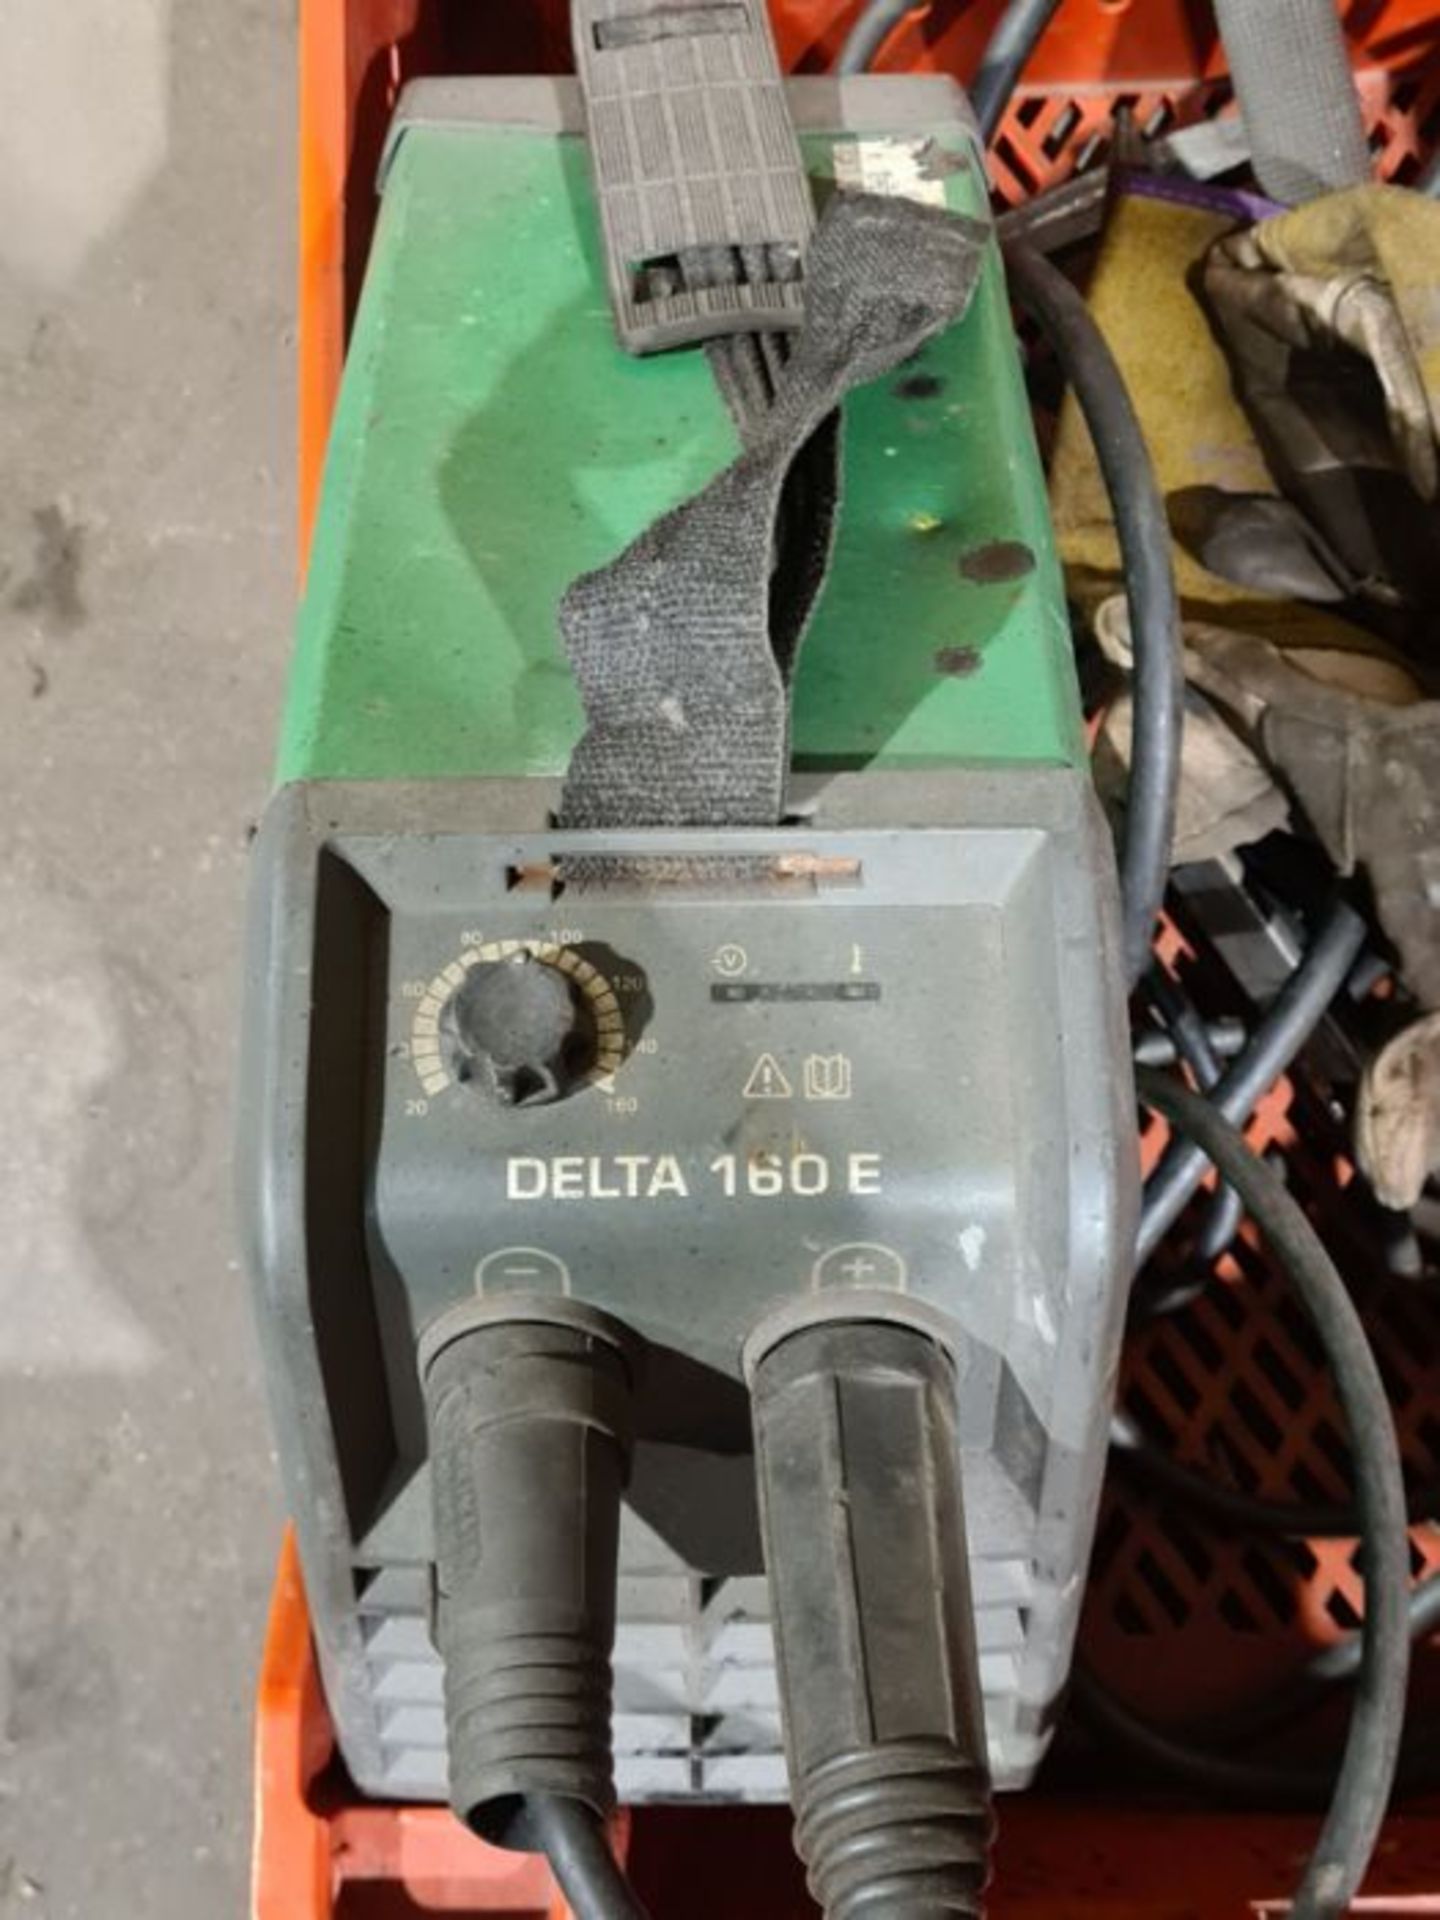 Migatronic Delta 160E welding machine and box of assorted welding rods. - Image 3 of 3